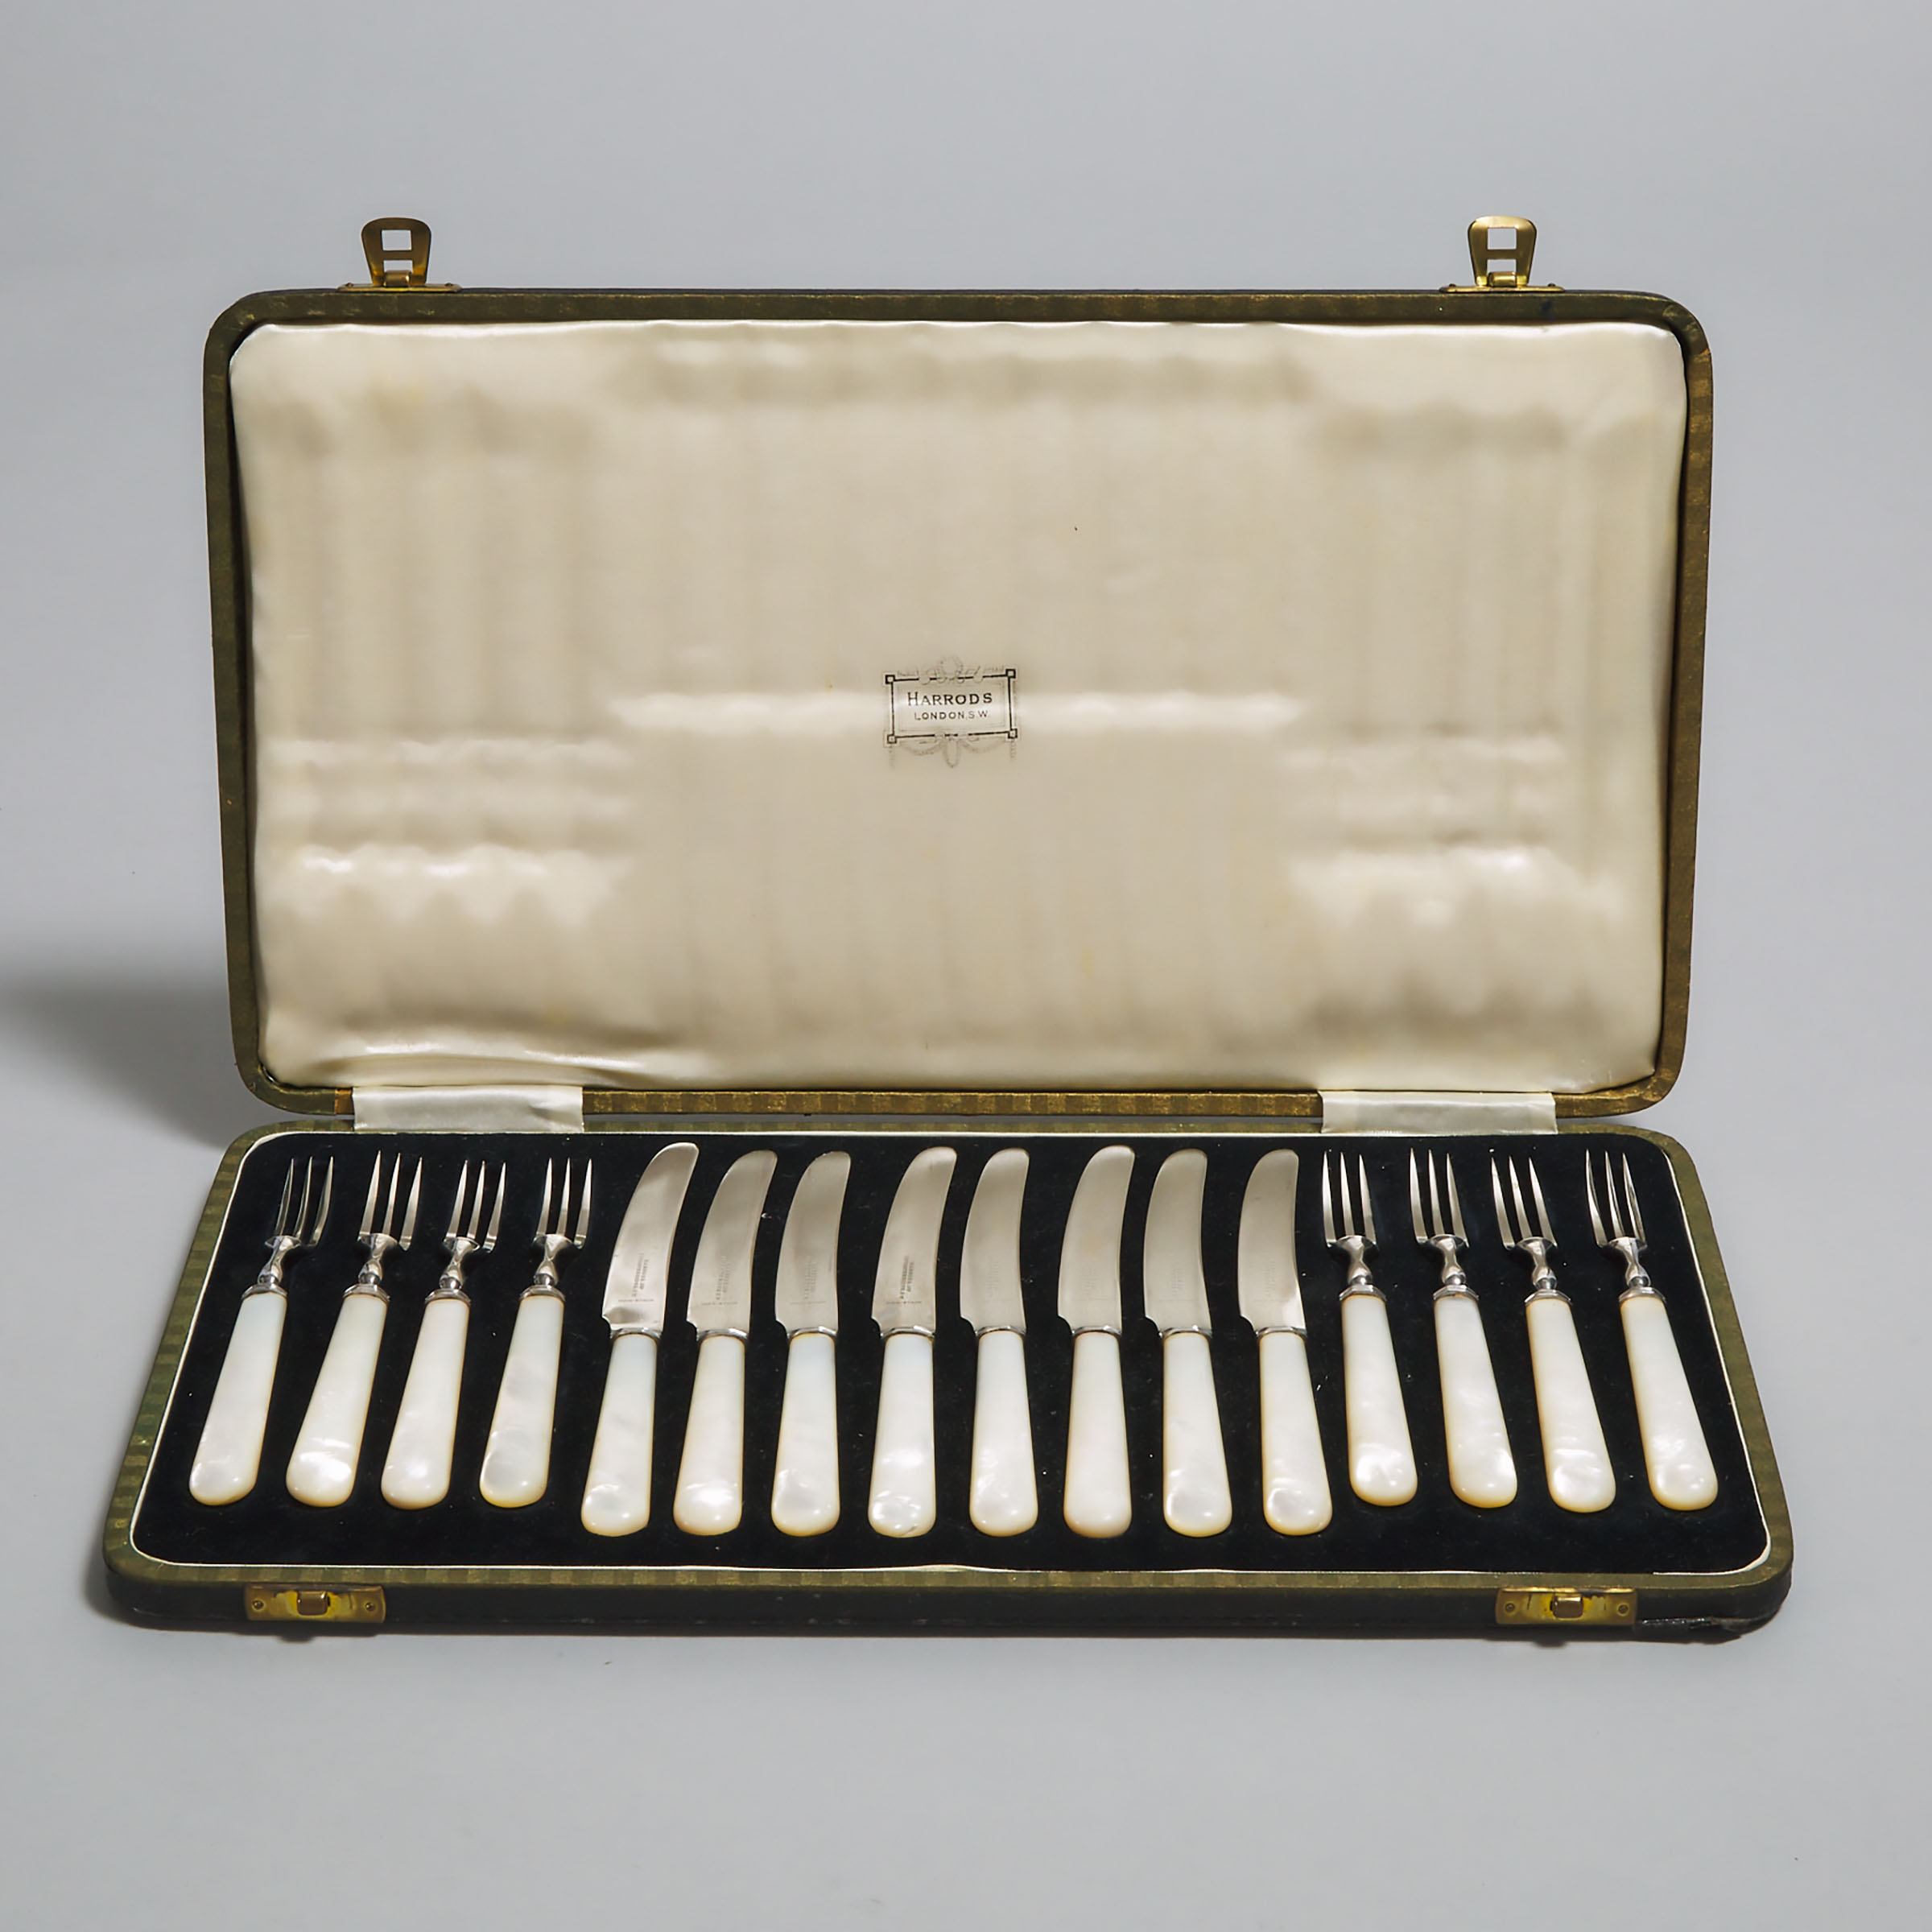 Harrods of London 16 Piece Mother-of-Pearl Handled Fruit Set, mid 20th century